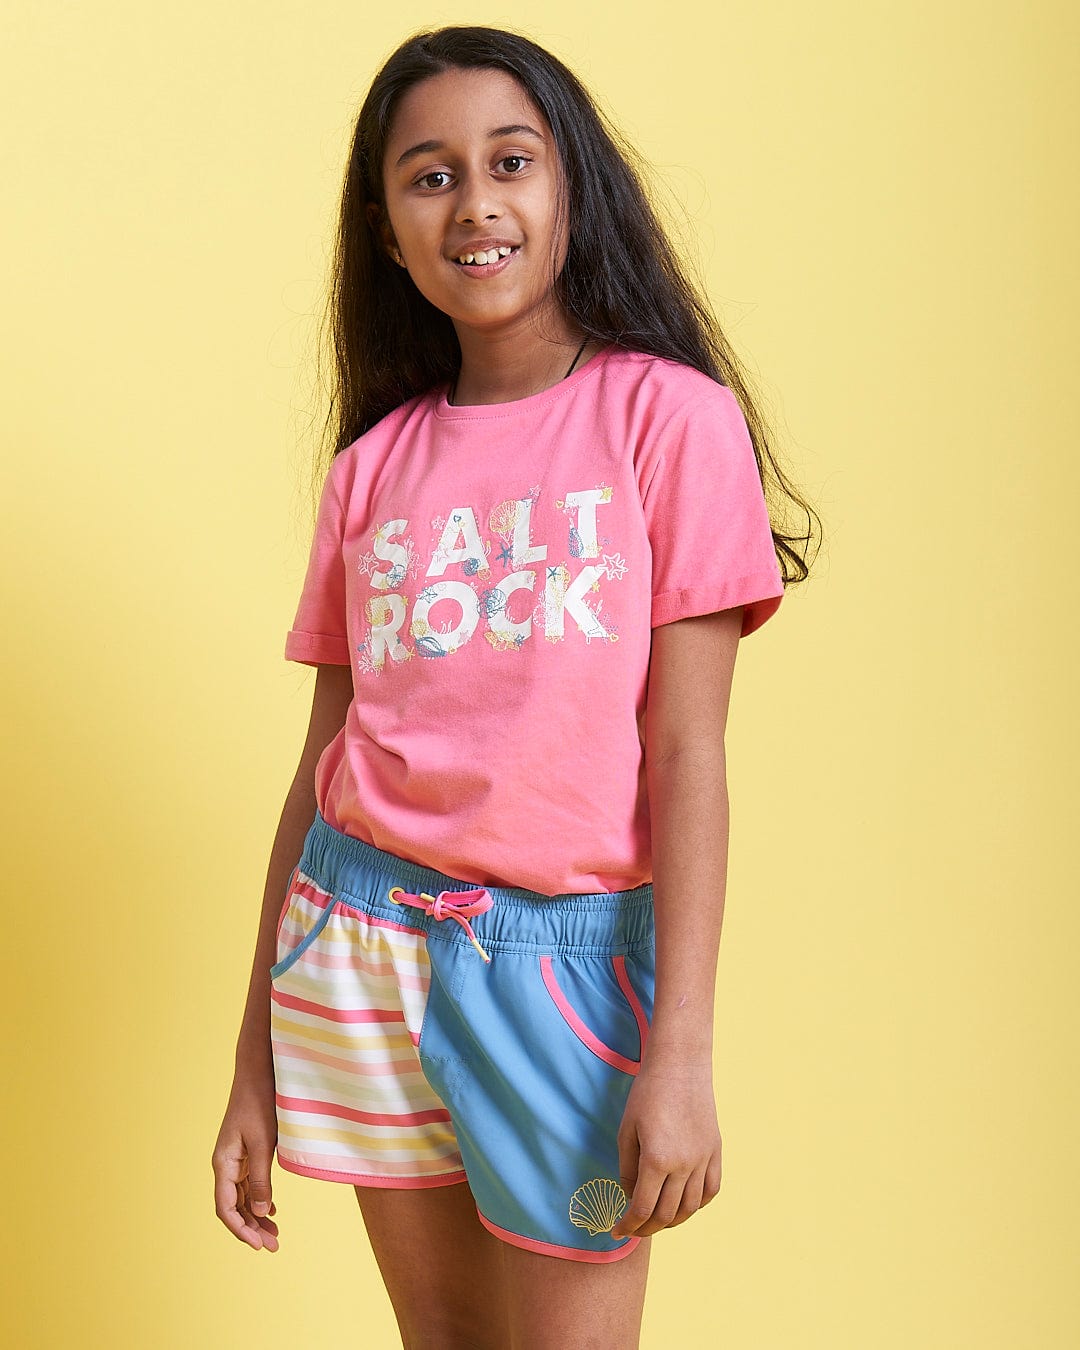 A girl in a Saltrock Seabed - Kids Short Sleeve T-Shirt - Pink and shorts.